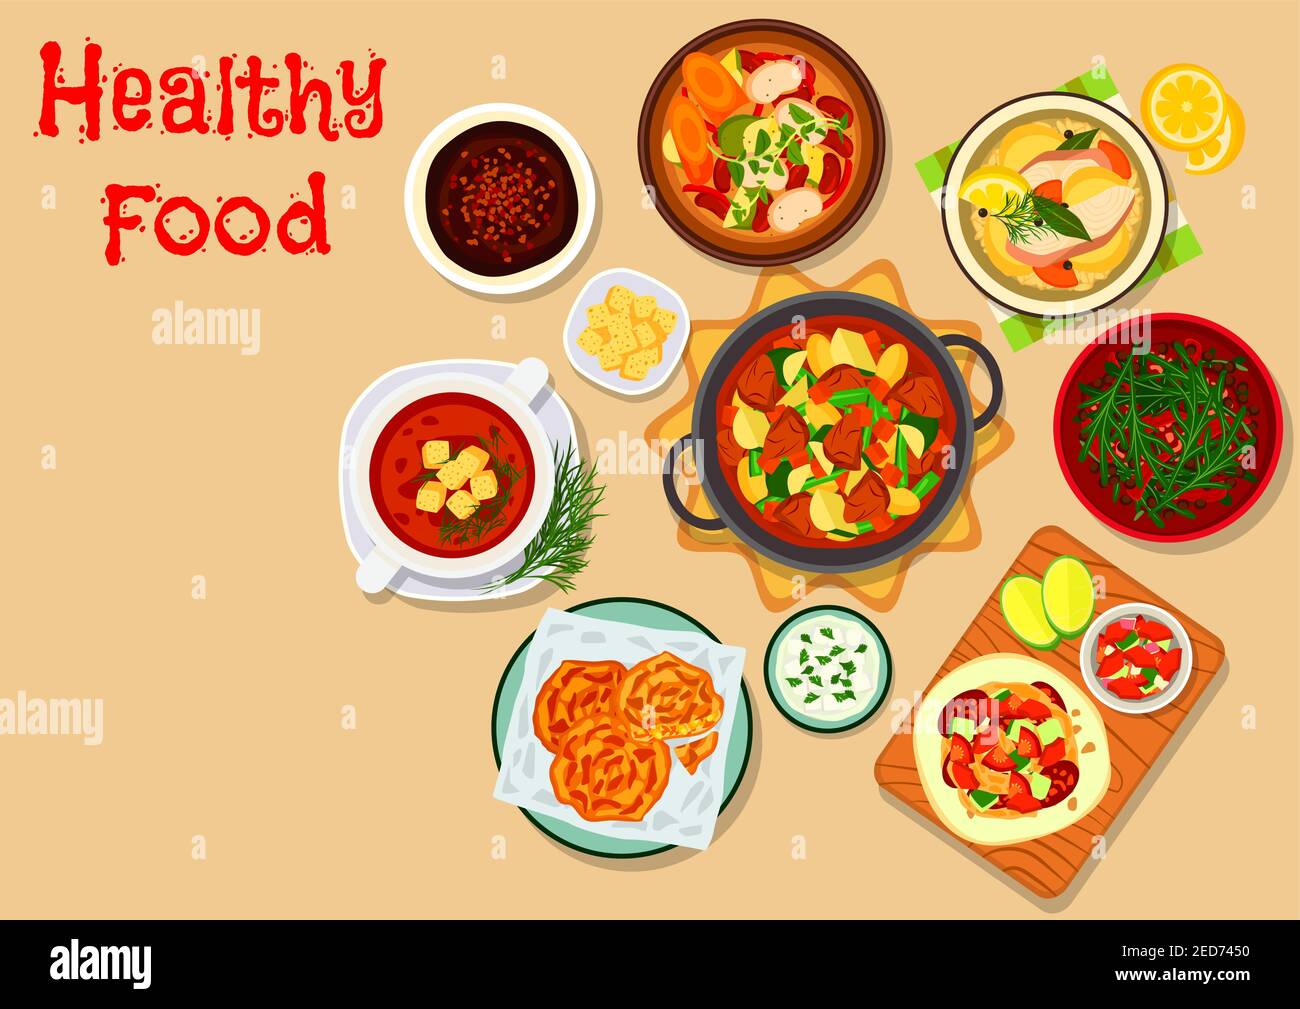 Tasty lunch dishes icon with vegetable beef stew, fish soup, sausage omelette, vegetable bean soup, tomato cream soup with croutons, carrot pancake, c Stock Vector